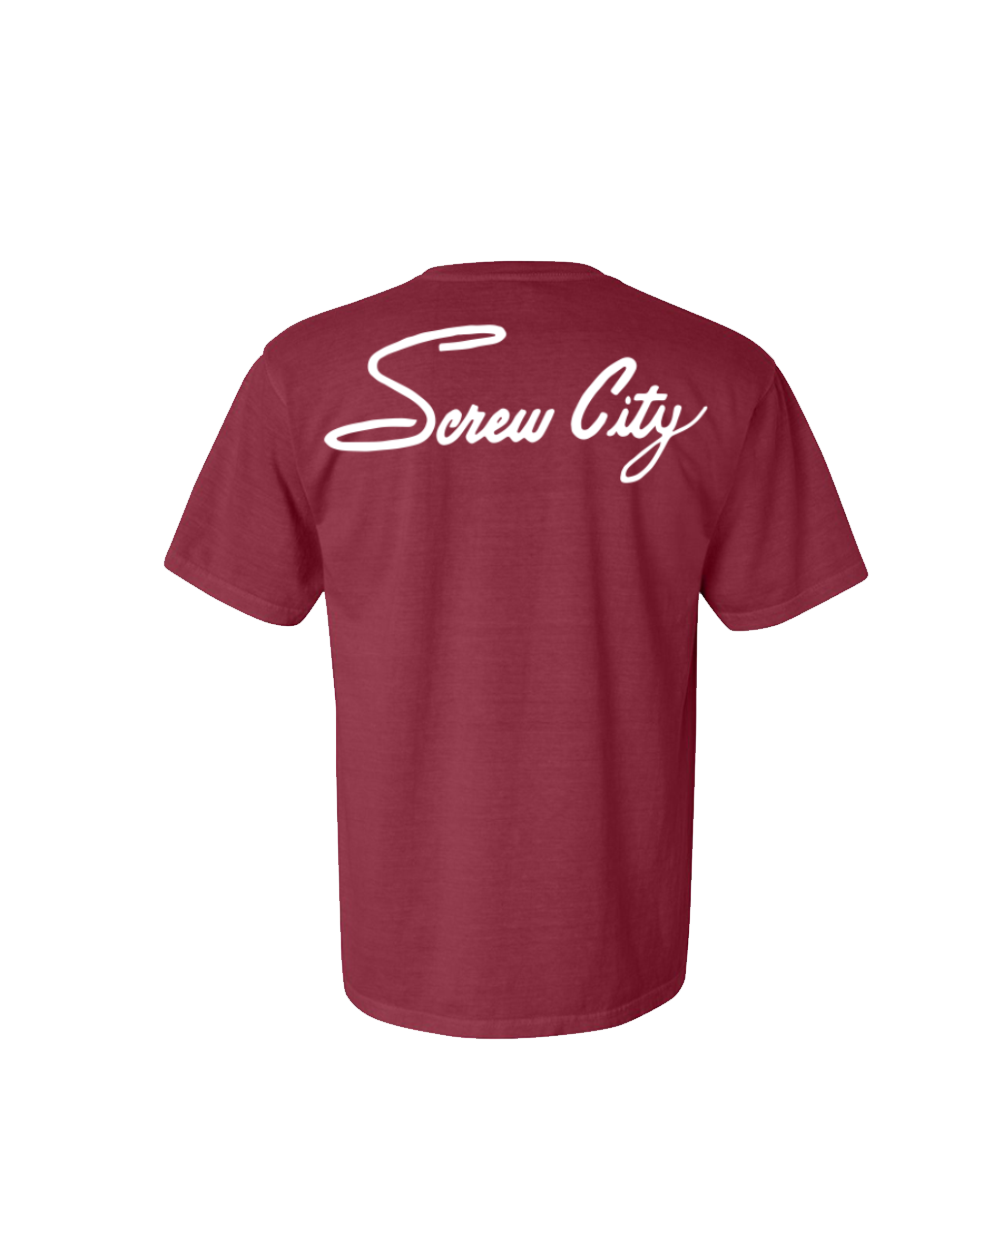 Screw City Tee (Faded Red)